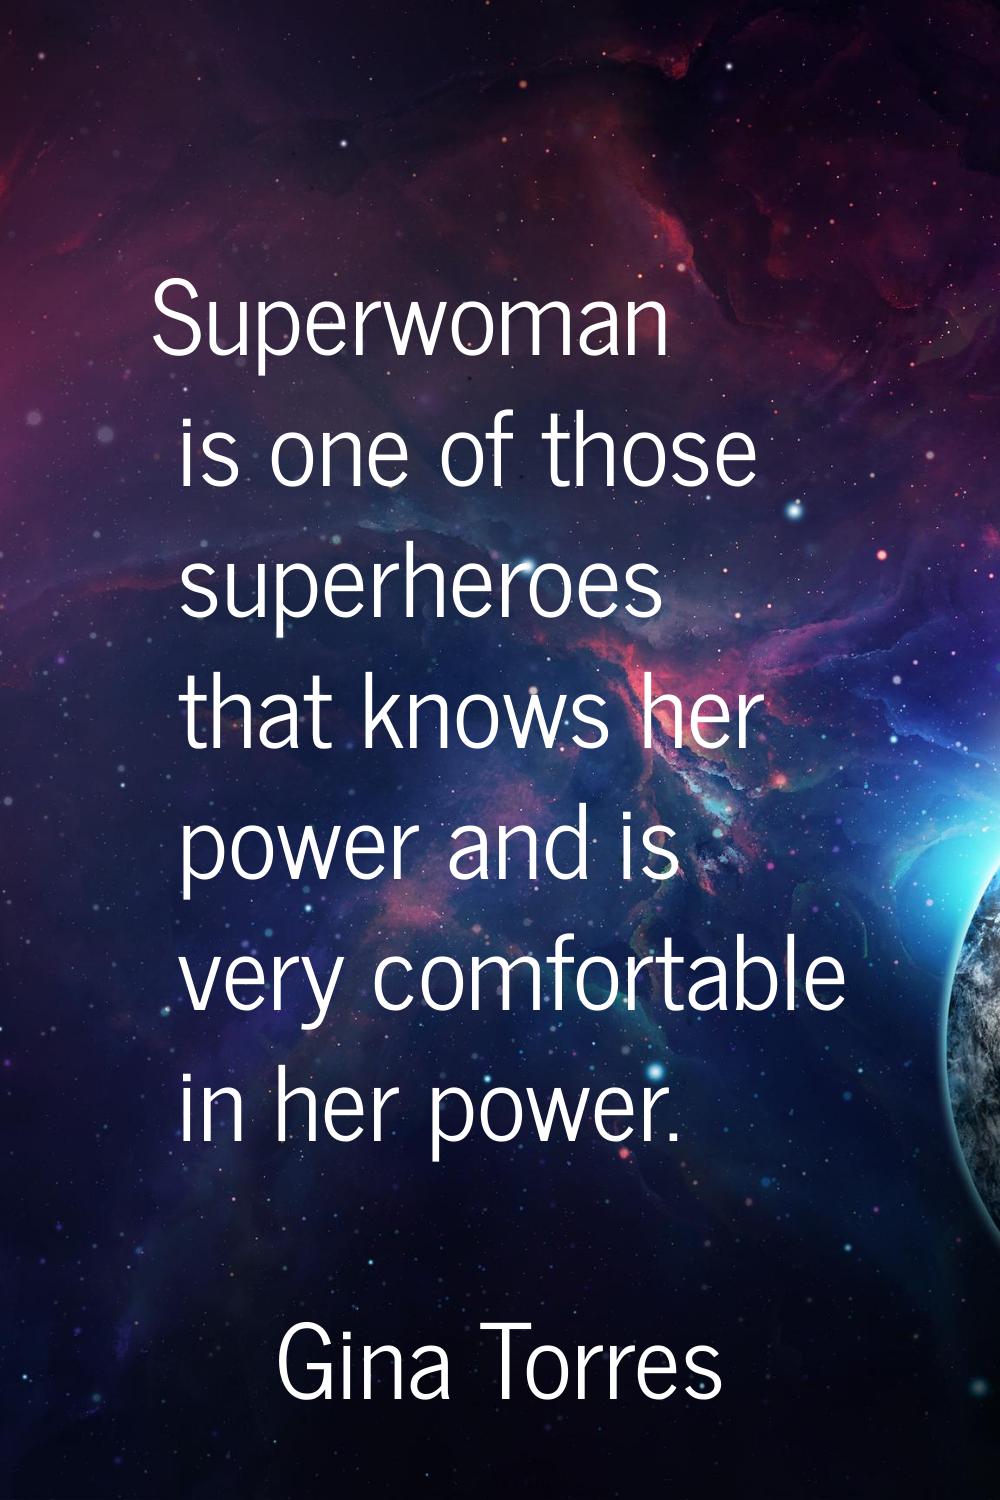 Superwoman is one of those superheroes that knows her power and is very comfortable in her power.